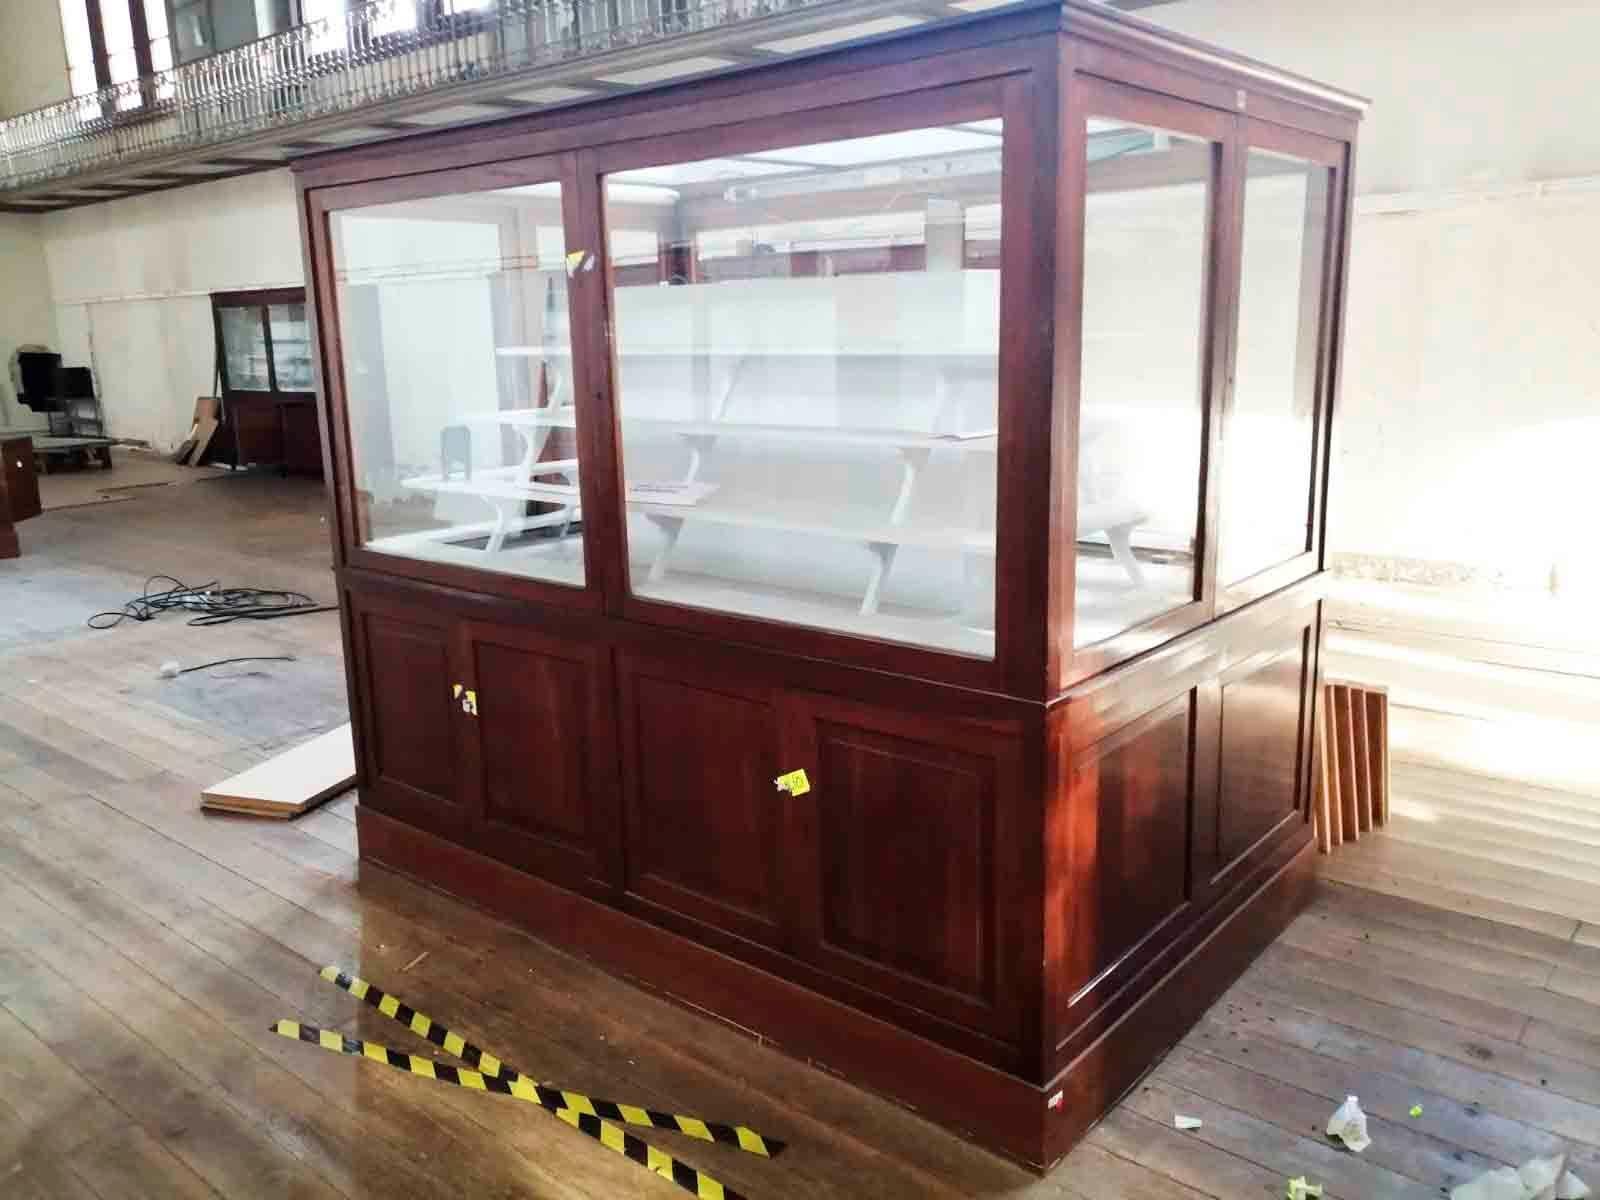 Early 20th Century Museum Vitrine from Barcelona's Natural Science Museum
The Natural Science Museum was relocated in 2010 leaving the vitrines behind.
The vitrines were in use since the 30's in the emblematic building called the 